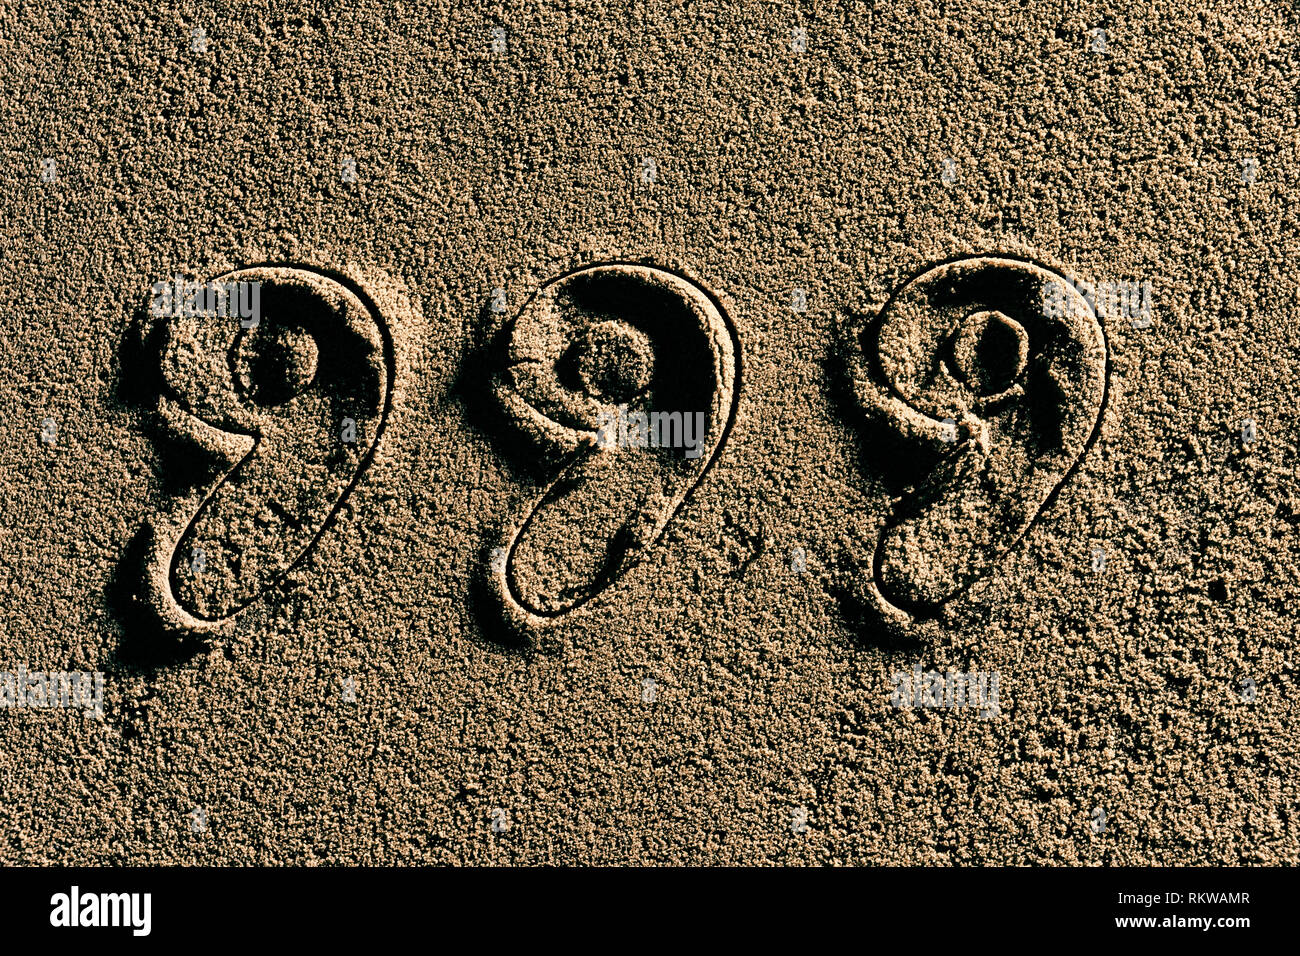 The numbers 999 cut into wet sand. Stock Photo